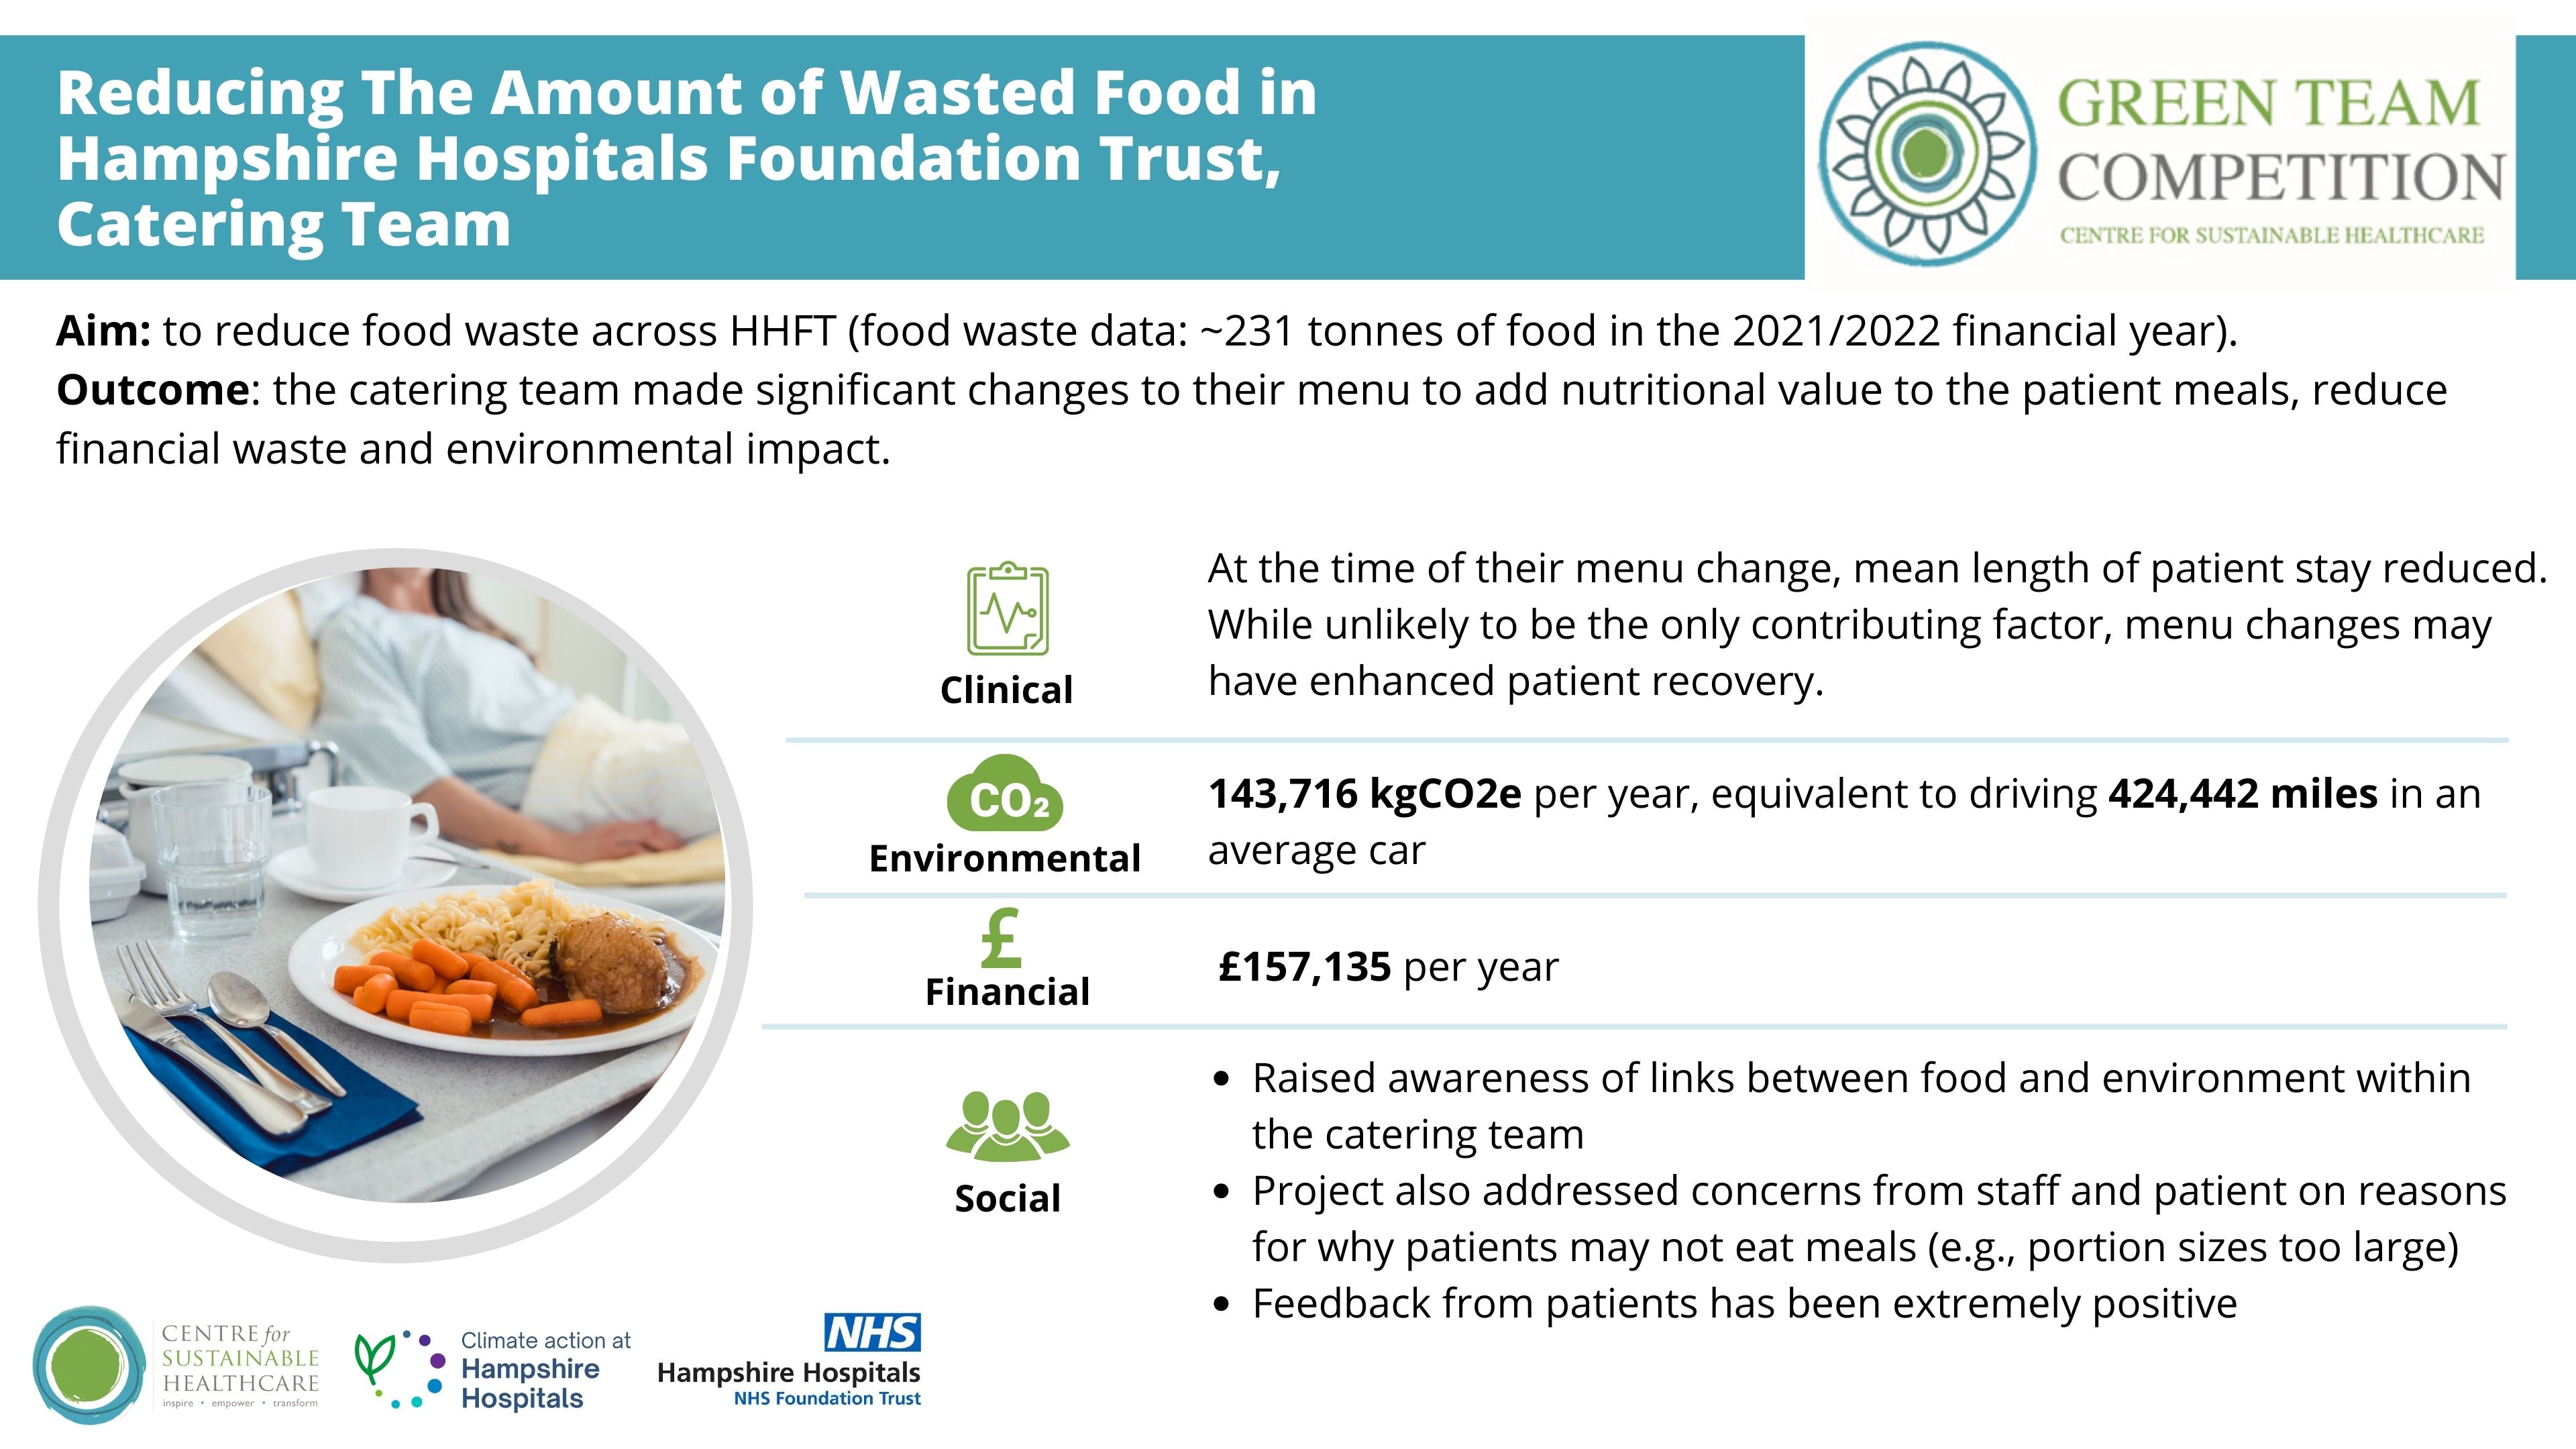 Reducing The Amount of Wasted Food in Hampshire Hospitals Foundation Trust, Catering team Hampshire Green Team Competition 2023